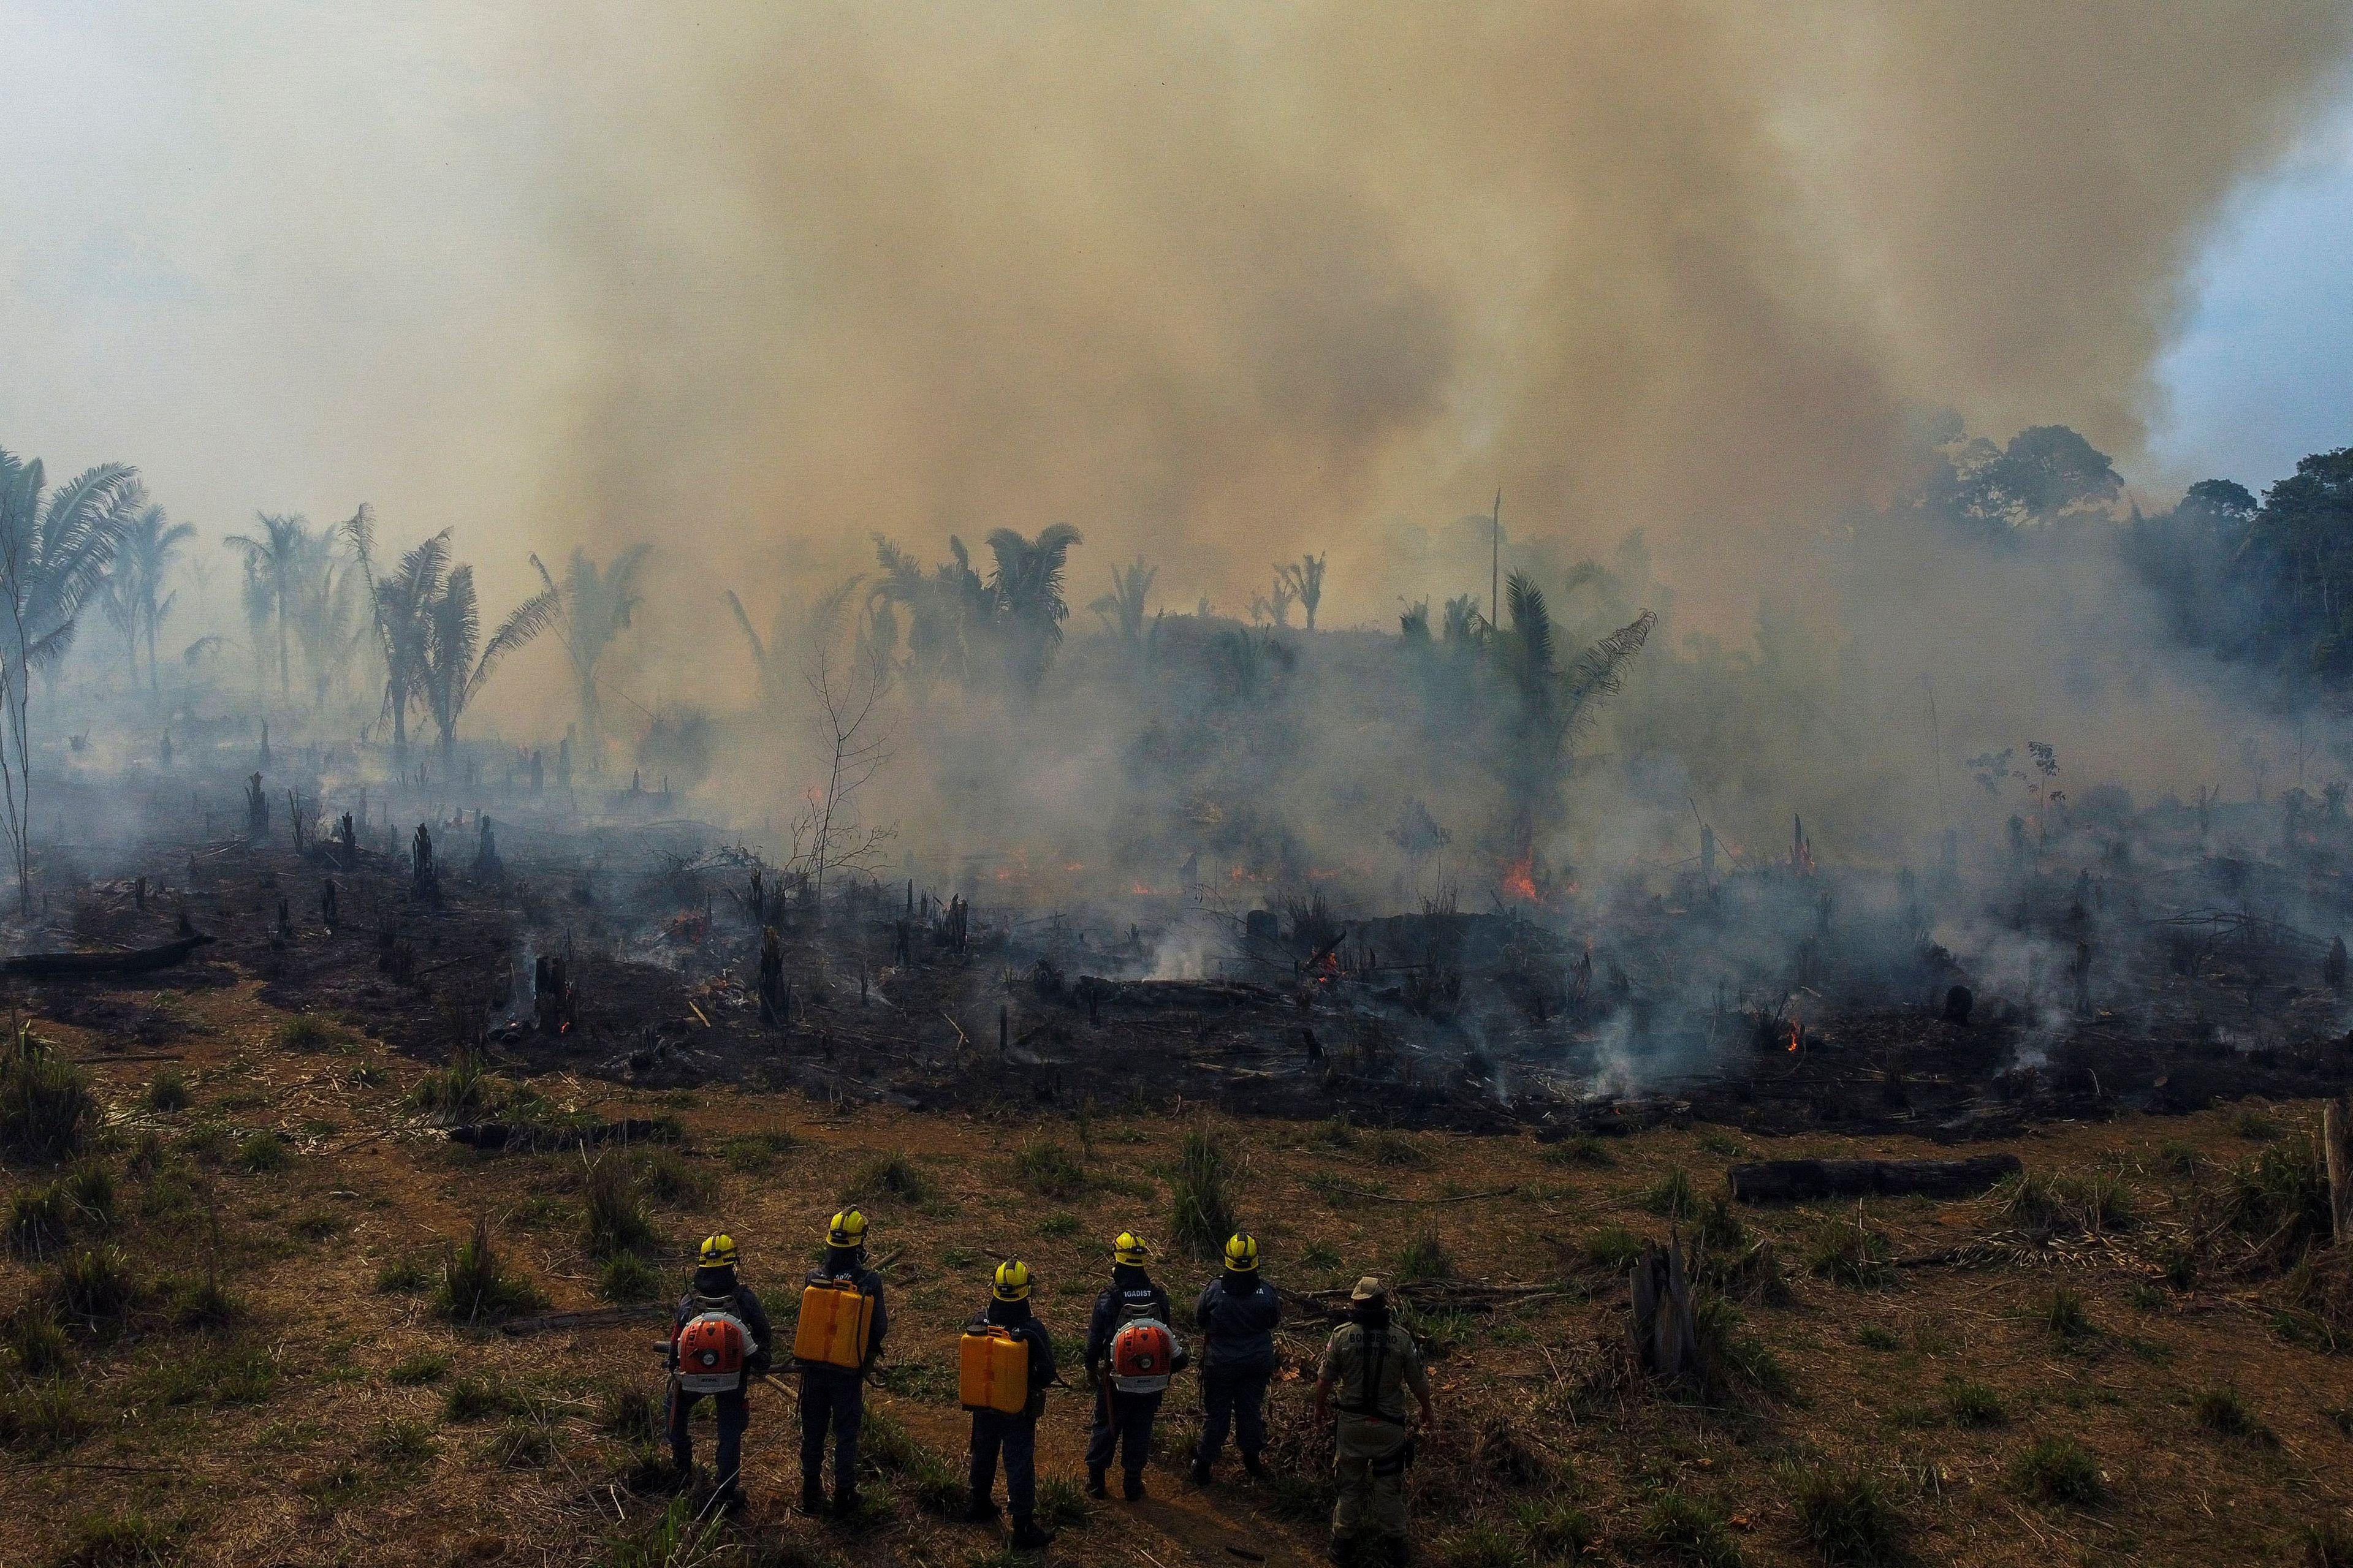 Firefighters looking at a mass of smoke in the Amazon rainforest